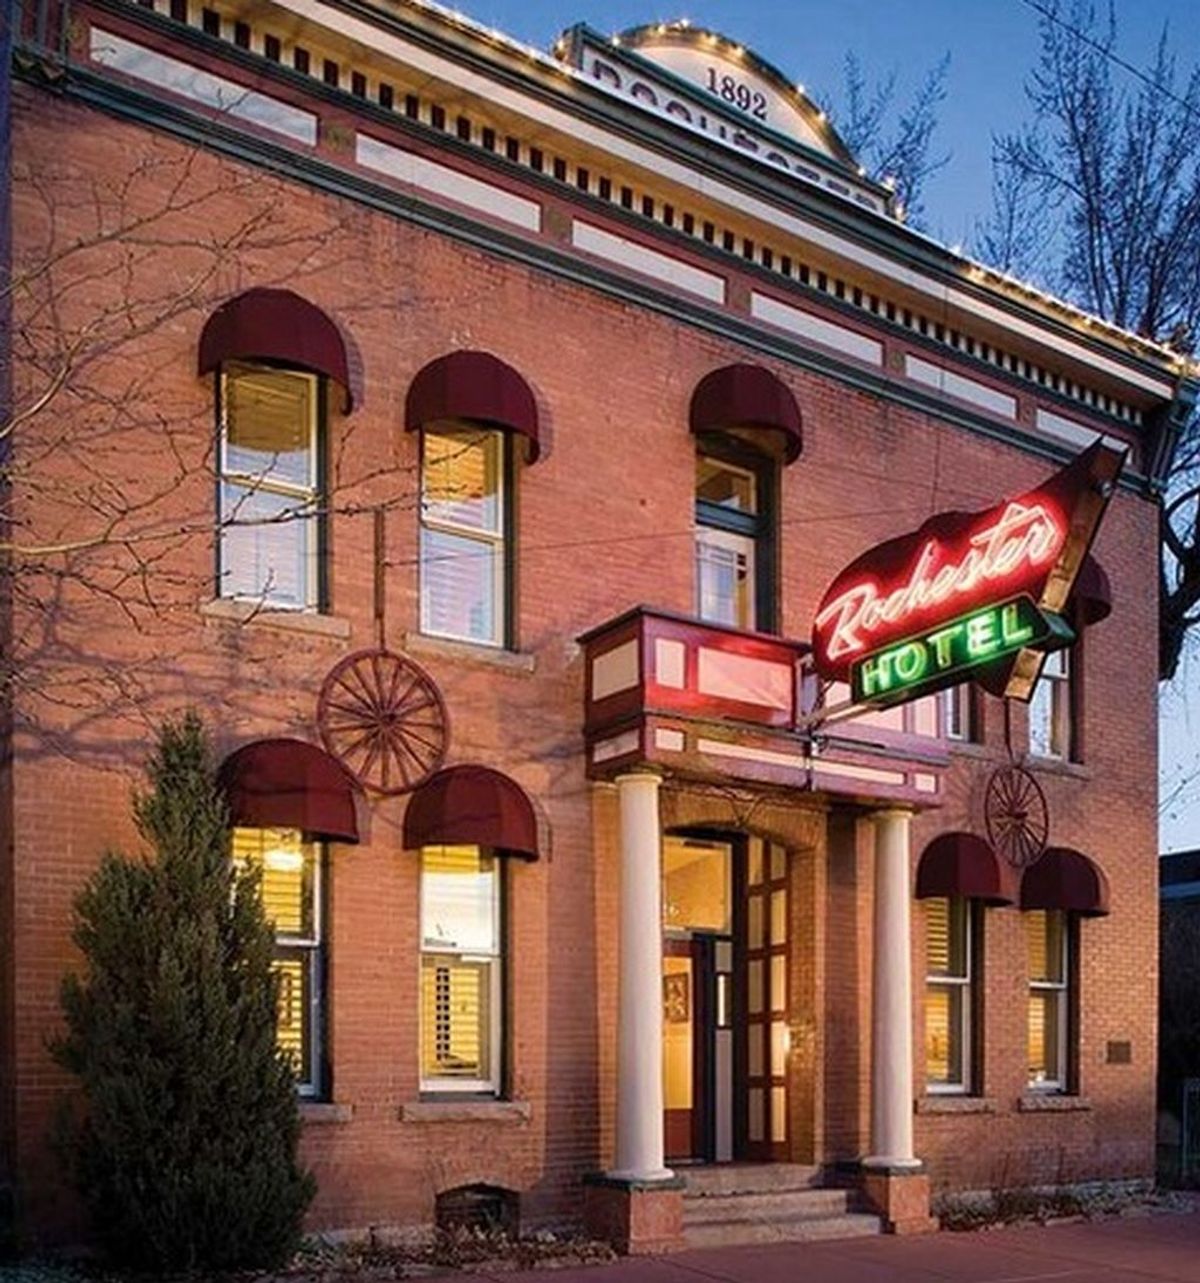 Rochester Hotel- First Class Durango, CO Hotels- GDS Reservation Codes:  Travel Weekly